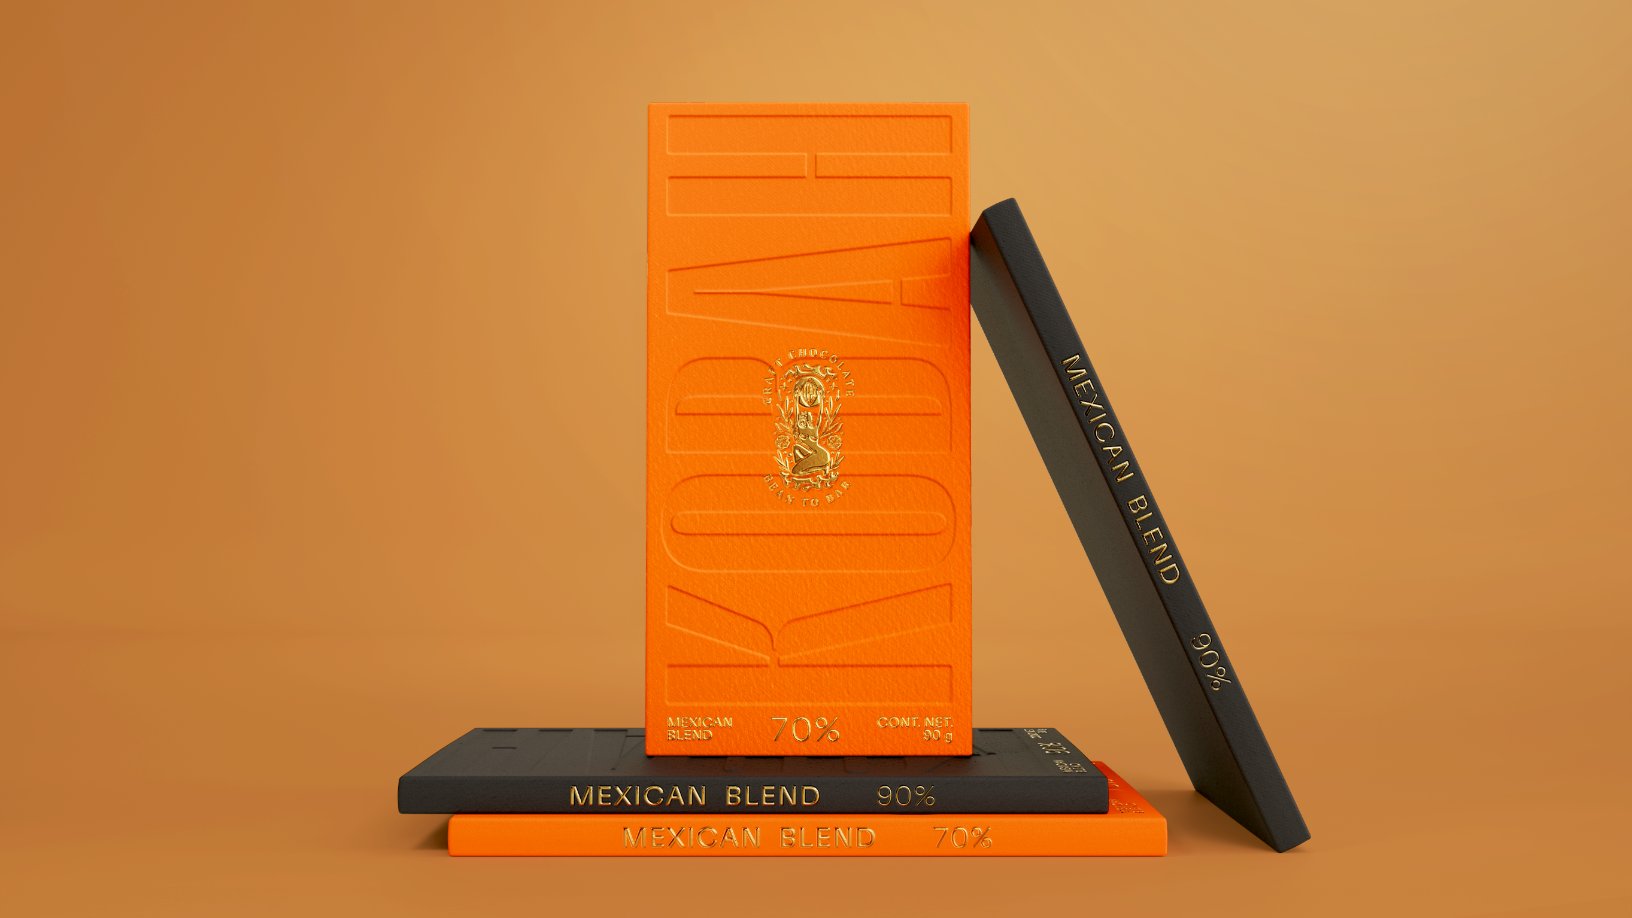 The Regal Look of Mexico’s Kobah Chocolate Turns Breaking Off a Piece Into a Religious Experience